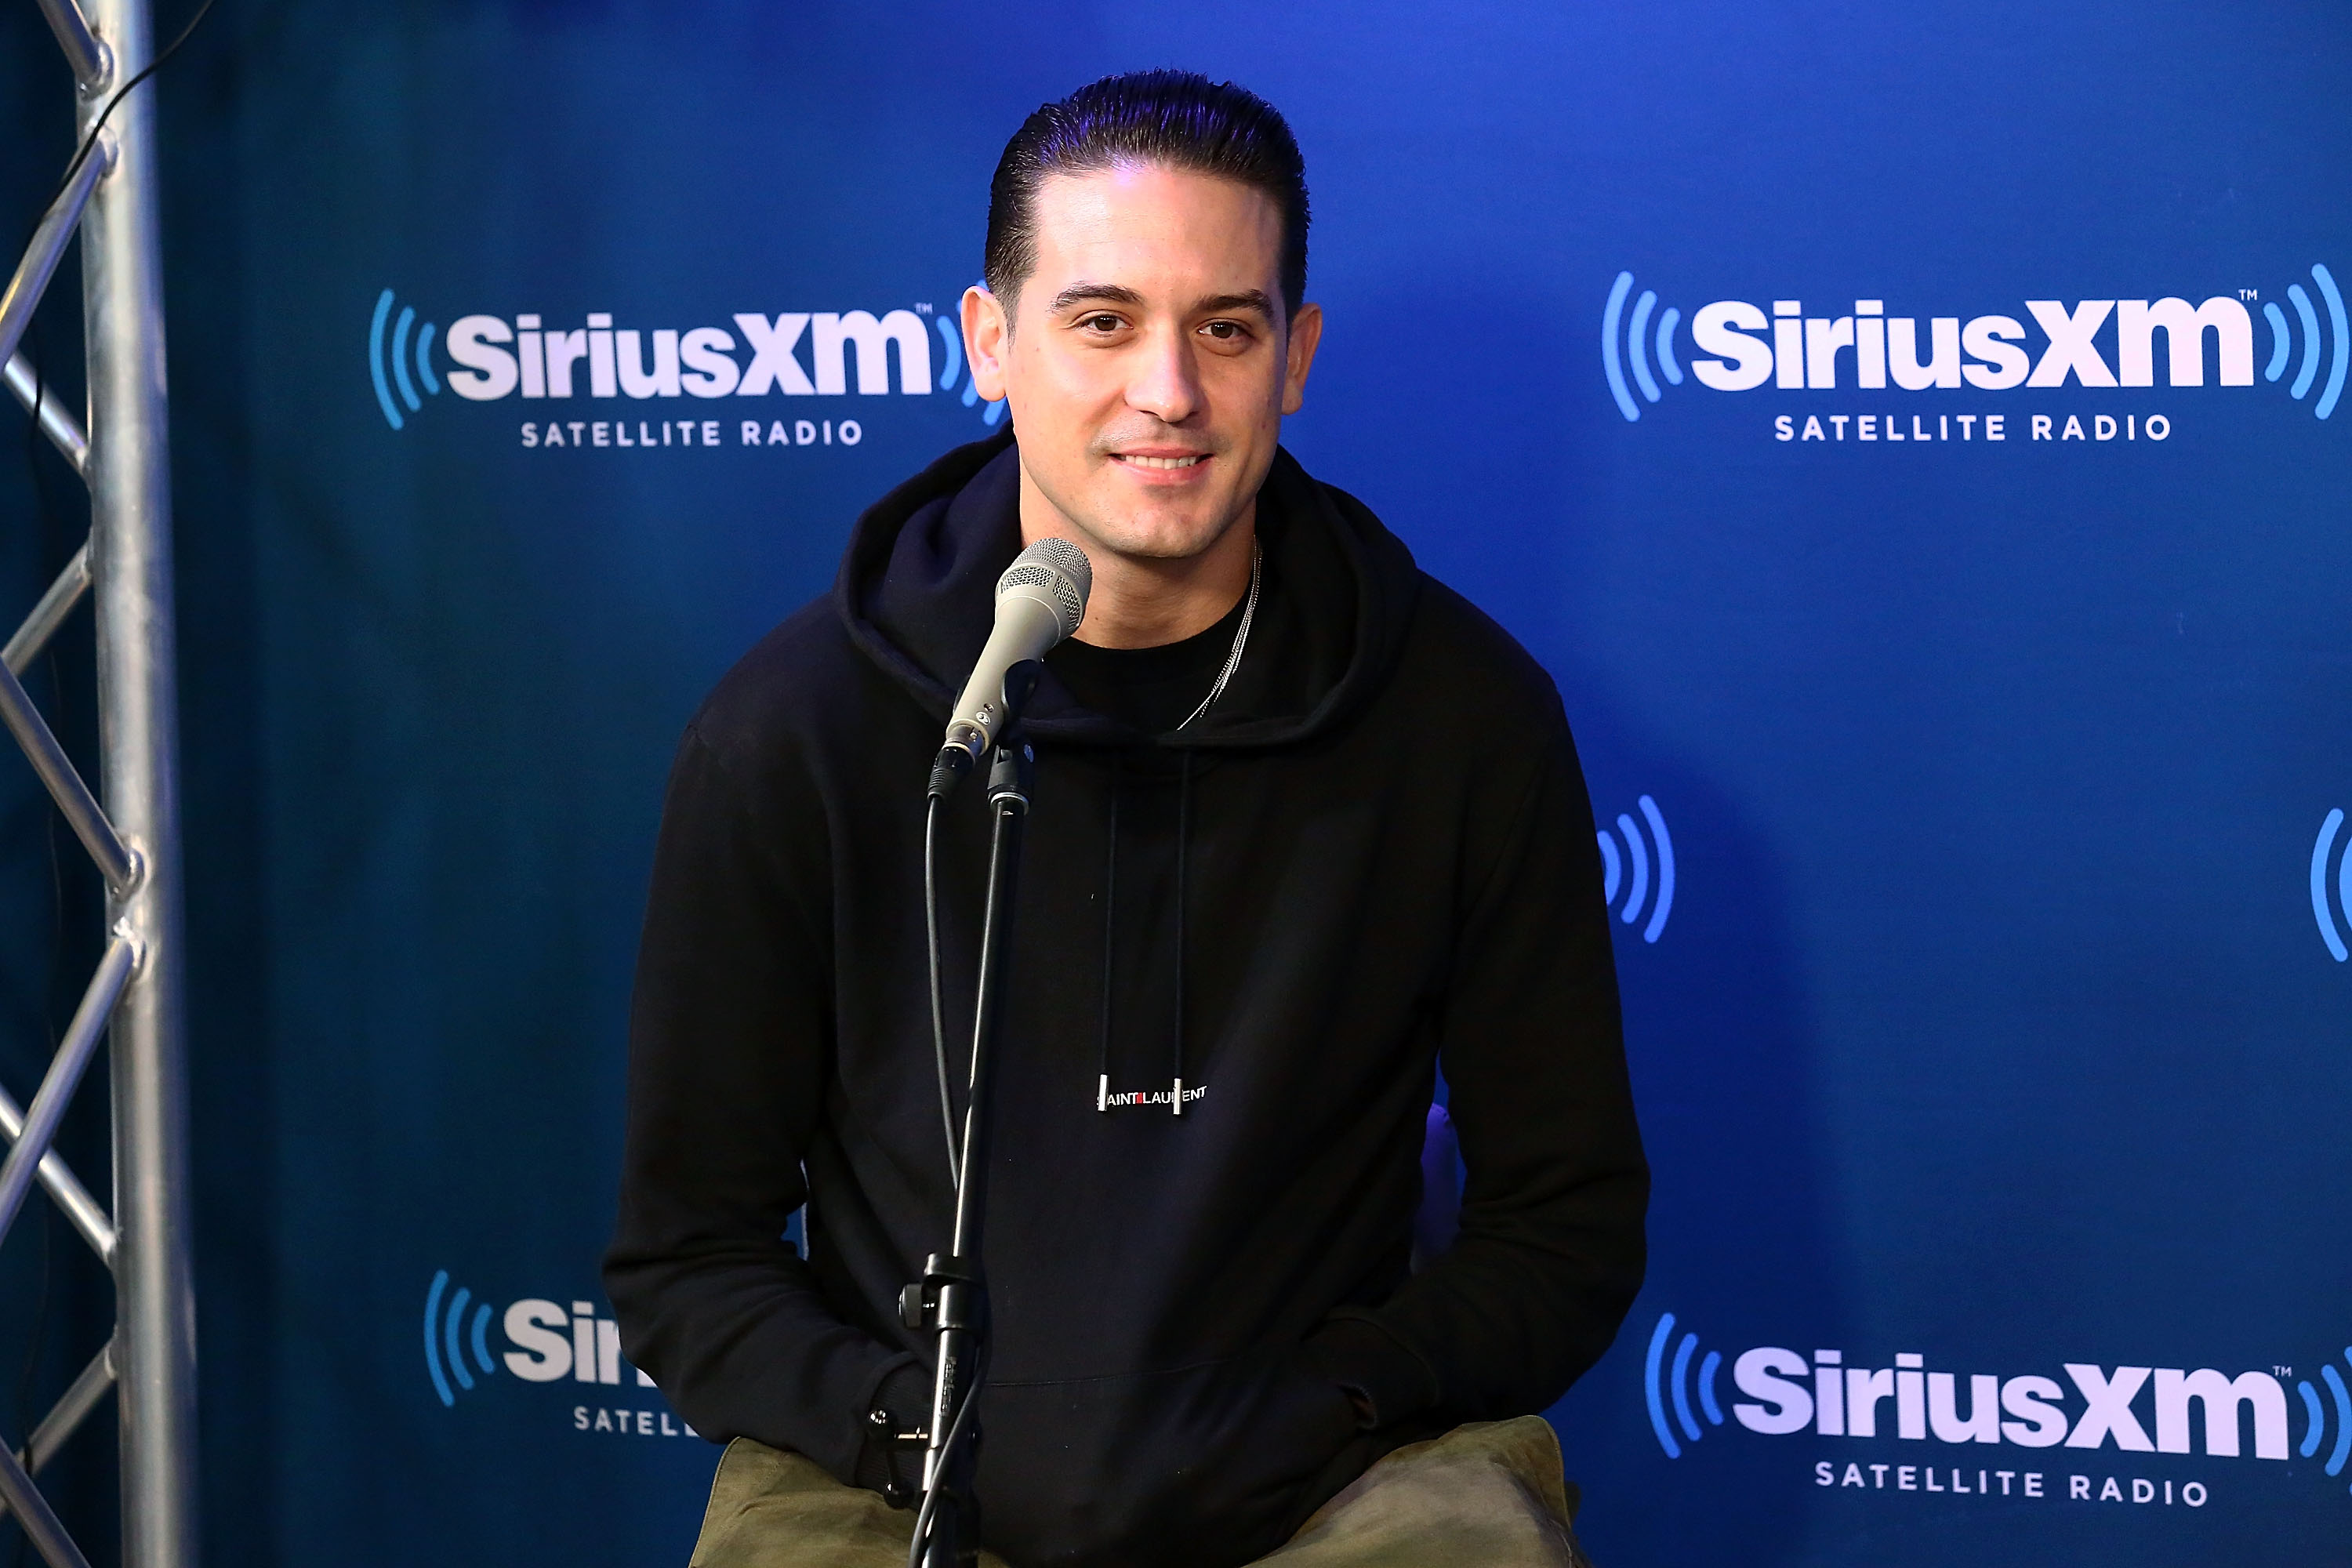 G-Eazy's New Double Album 'The Beautiful & Damned' Was Inspired by